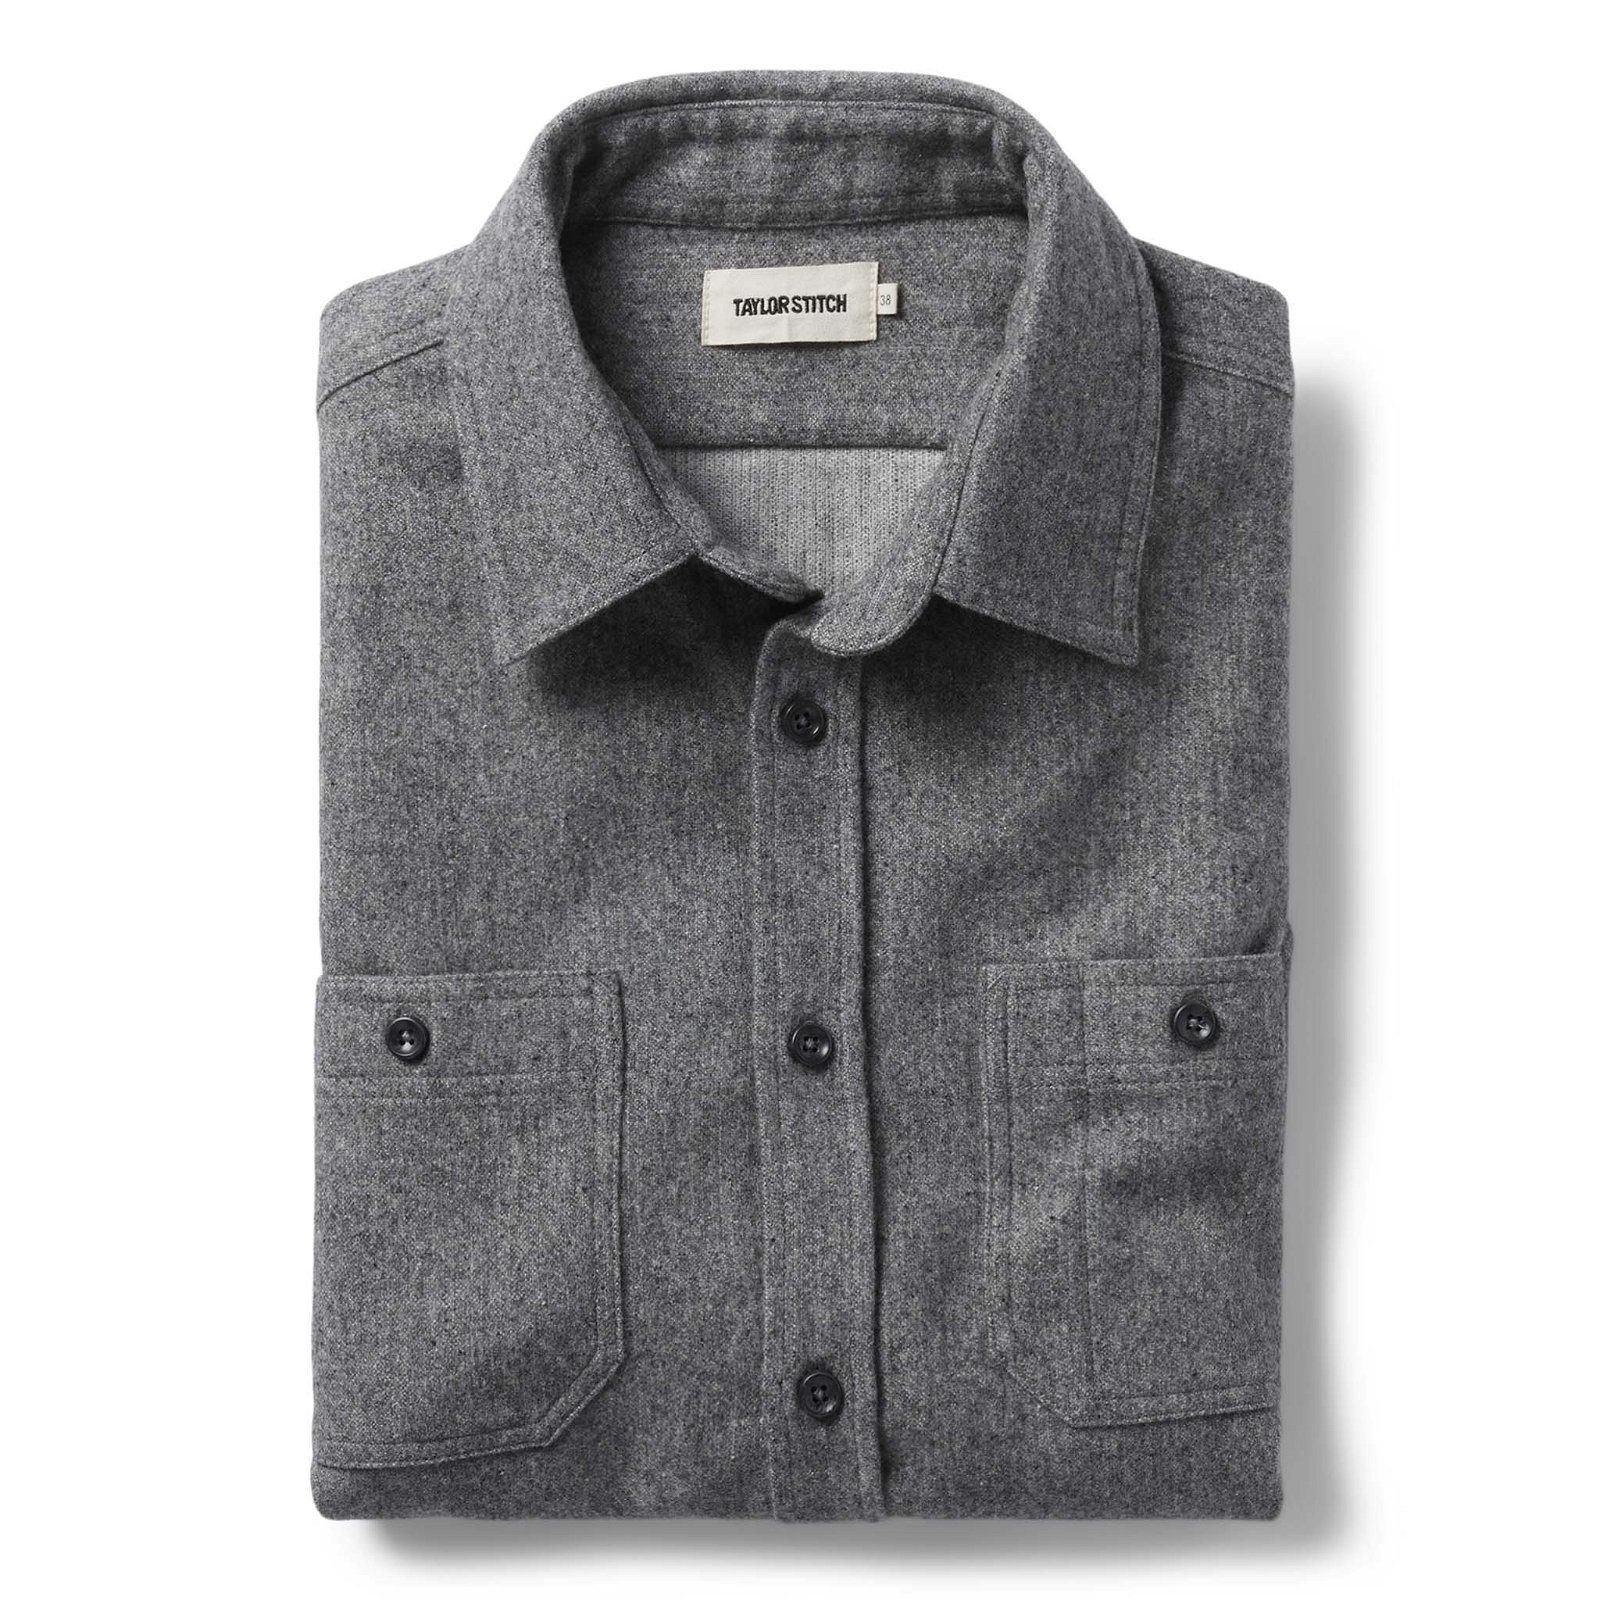 Image of The Utility Shirt in Ash Donegal Wool